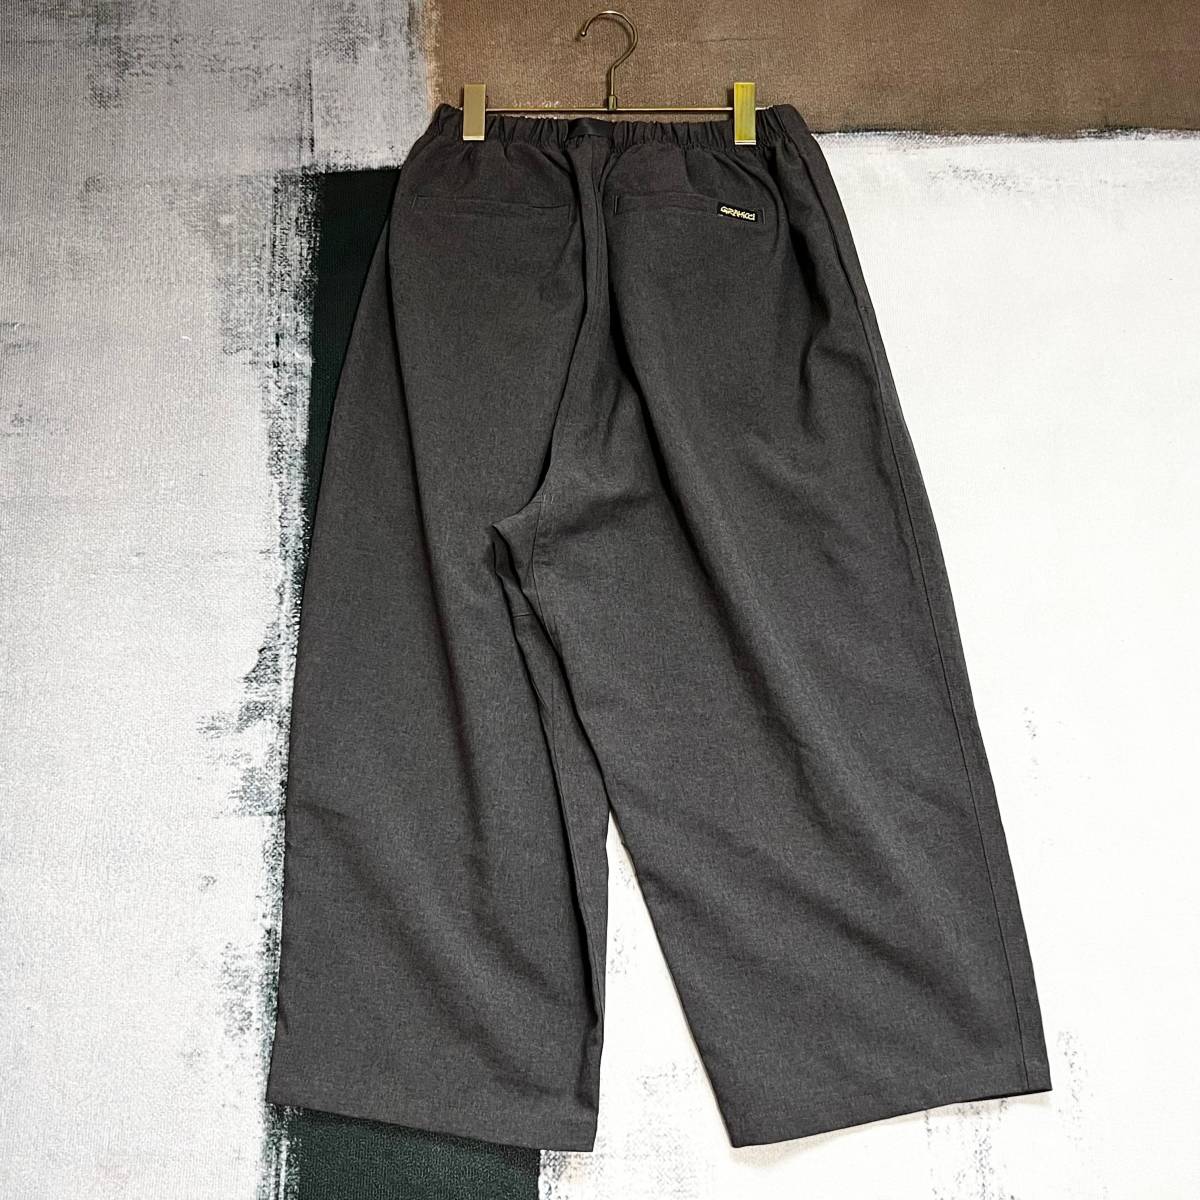  beautiful goods *GRAMICCI Gramicci poly- bell tedo climbing wide pants man and woman use GLP-19S898 gray M size bottoms 